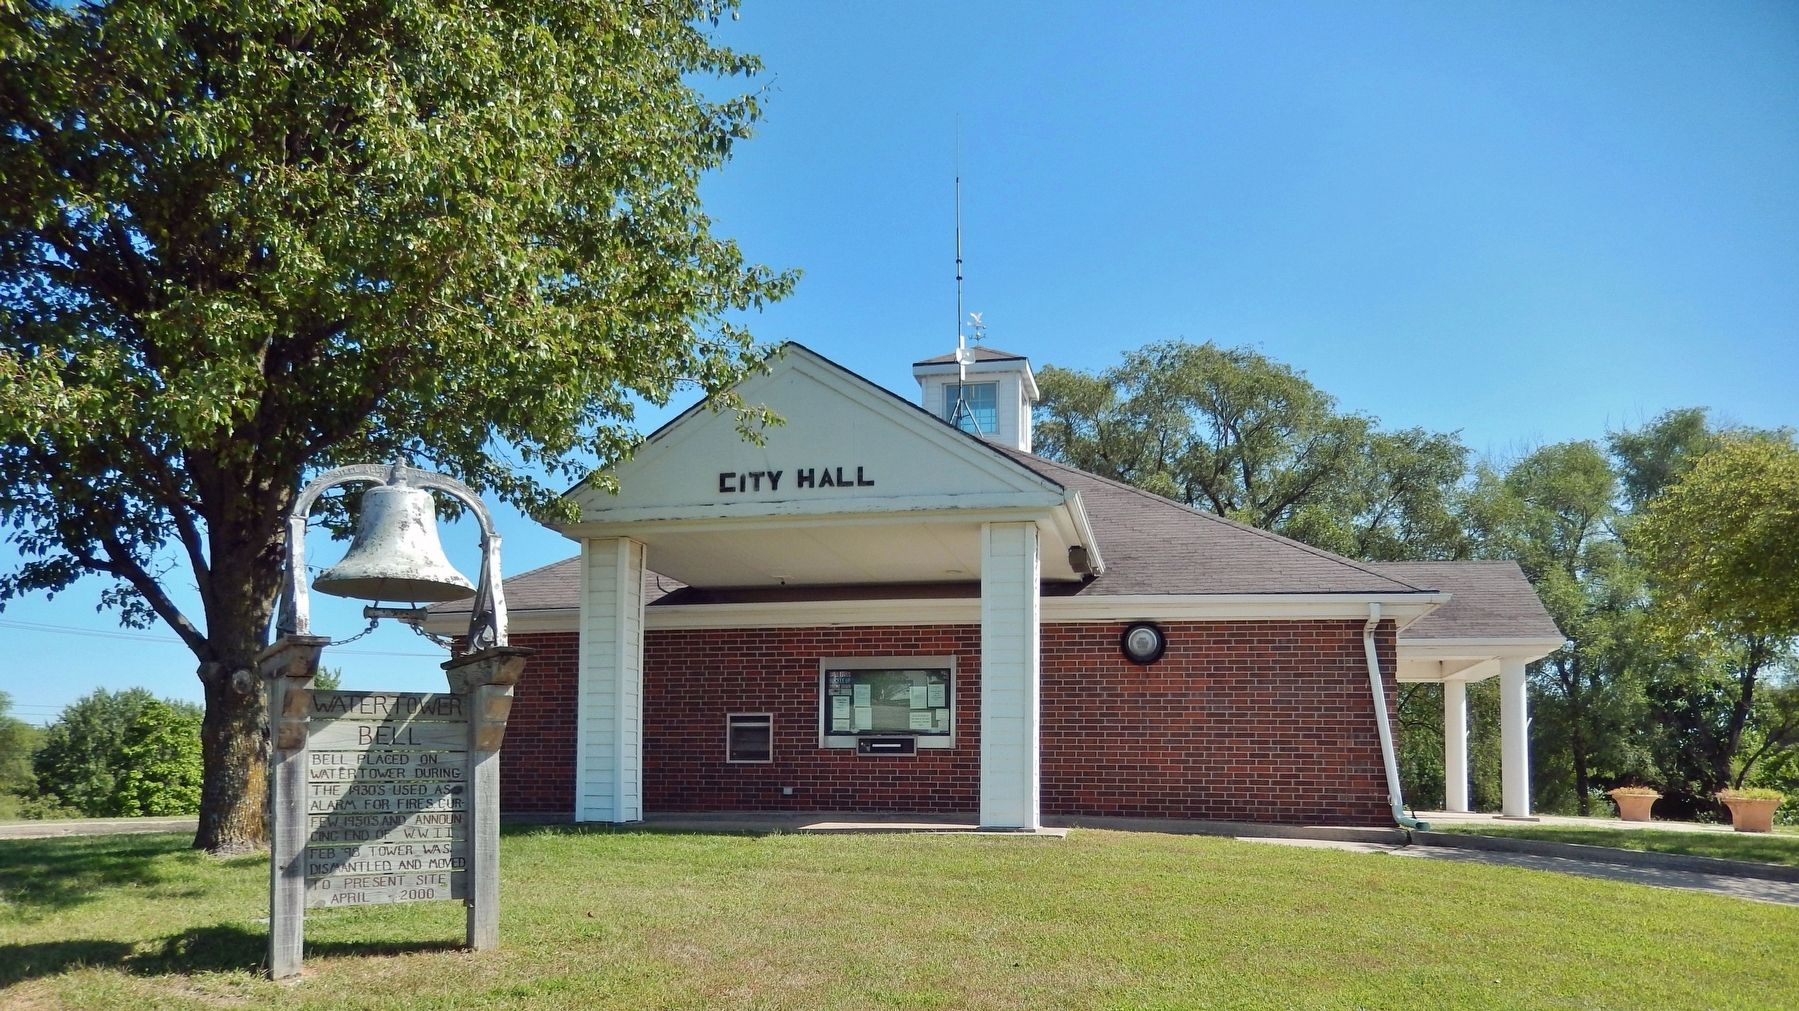 City Hall - Grant City image. Click for full size.